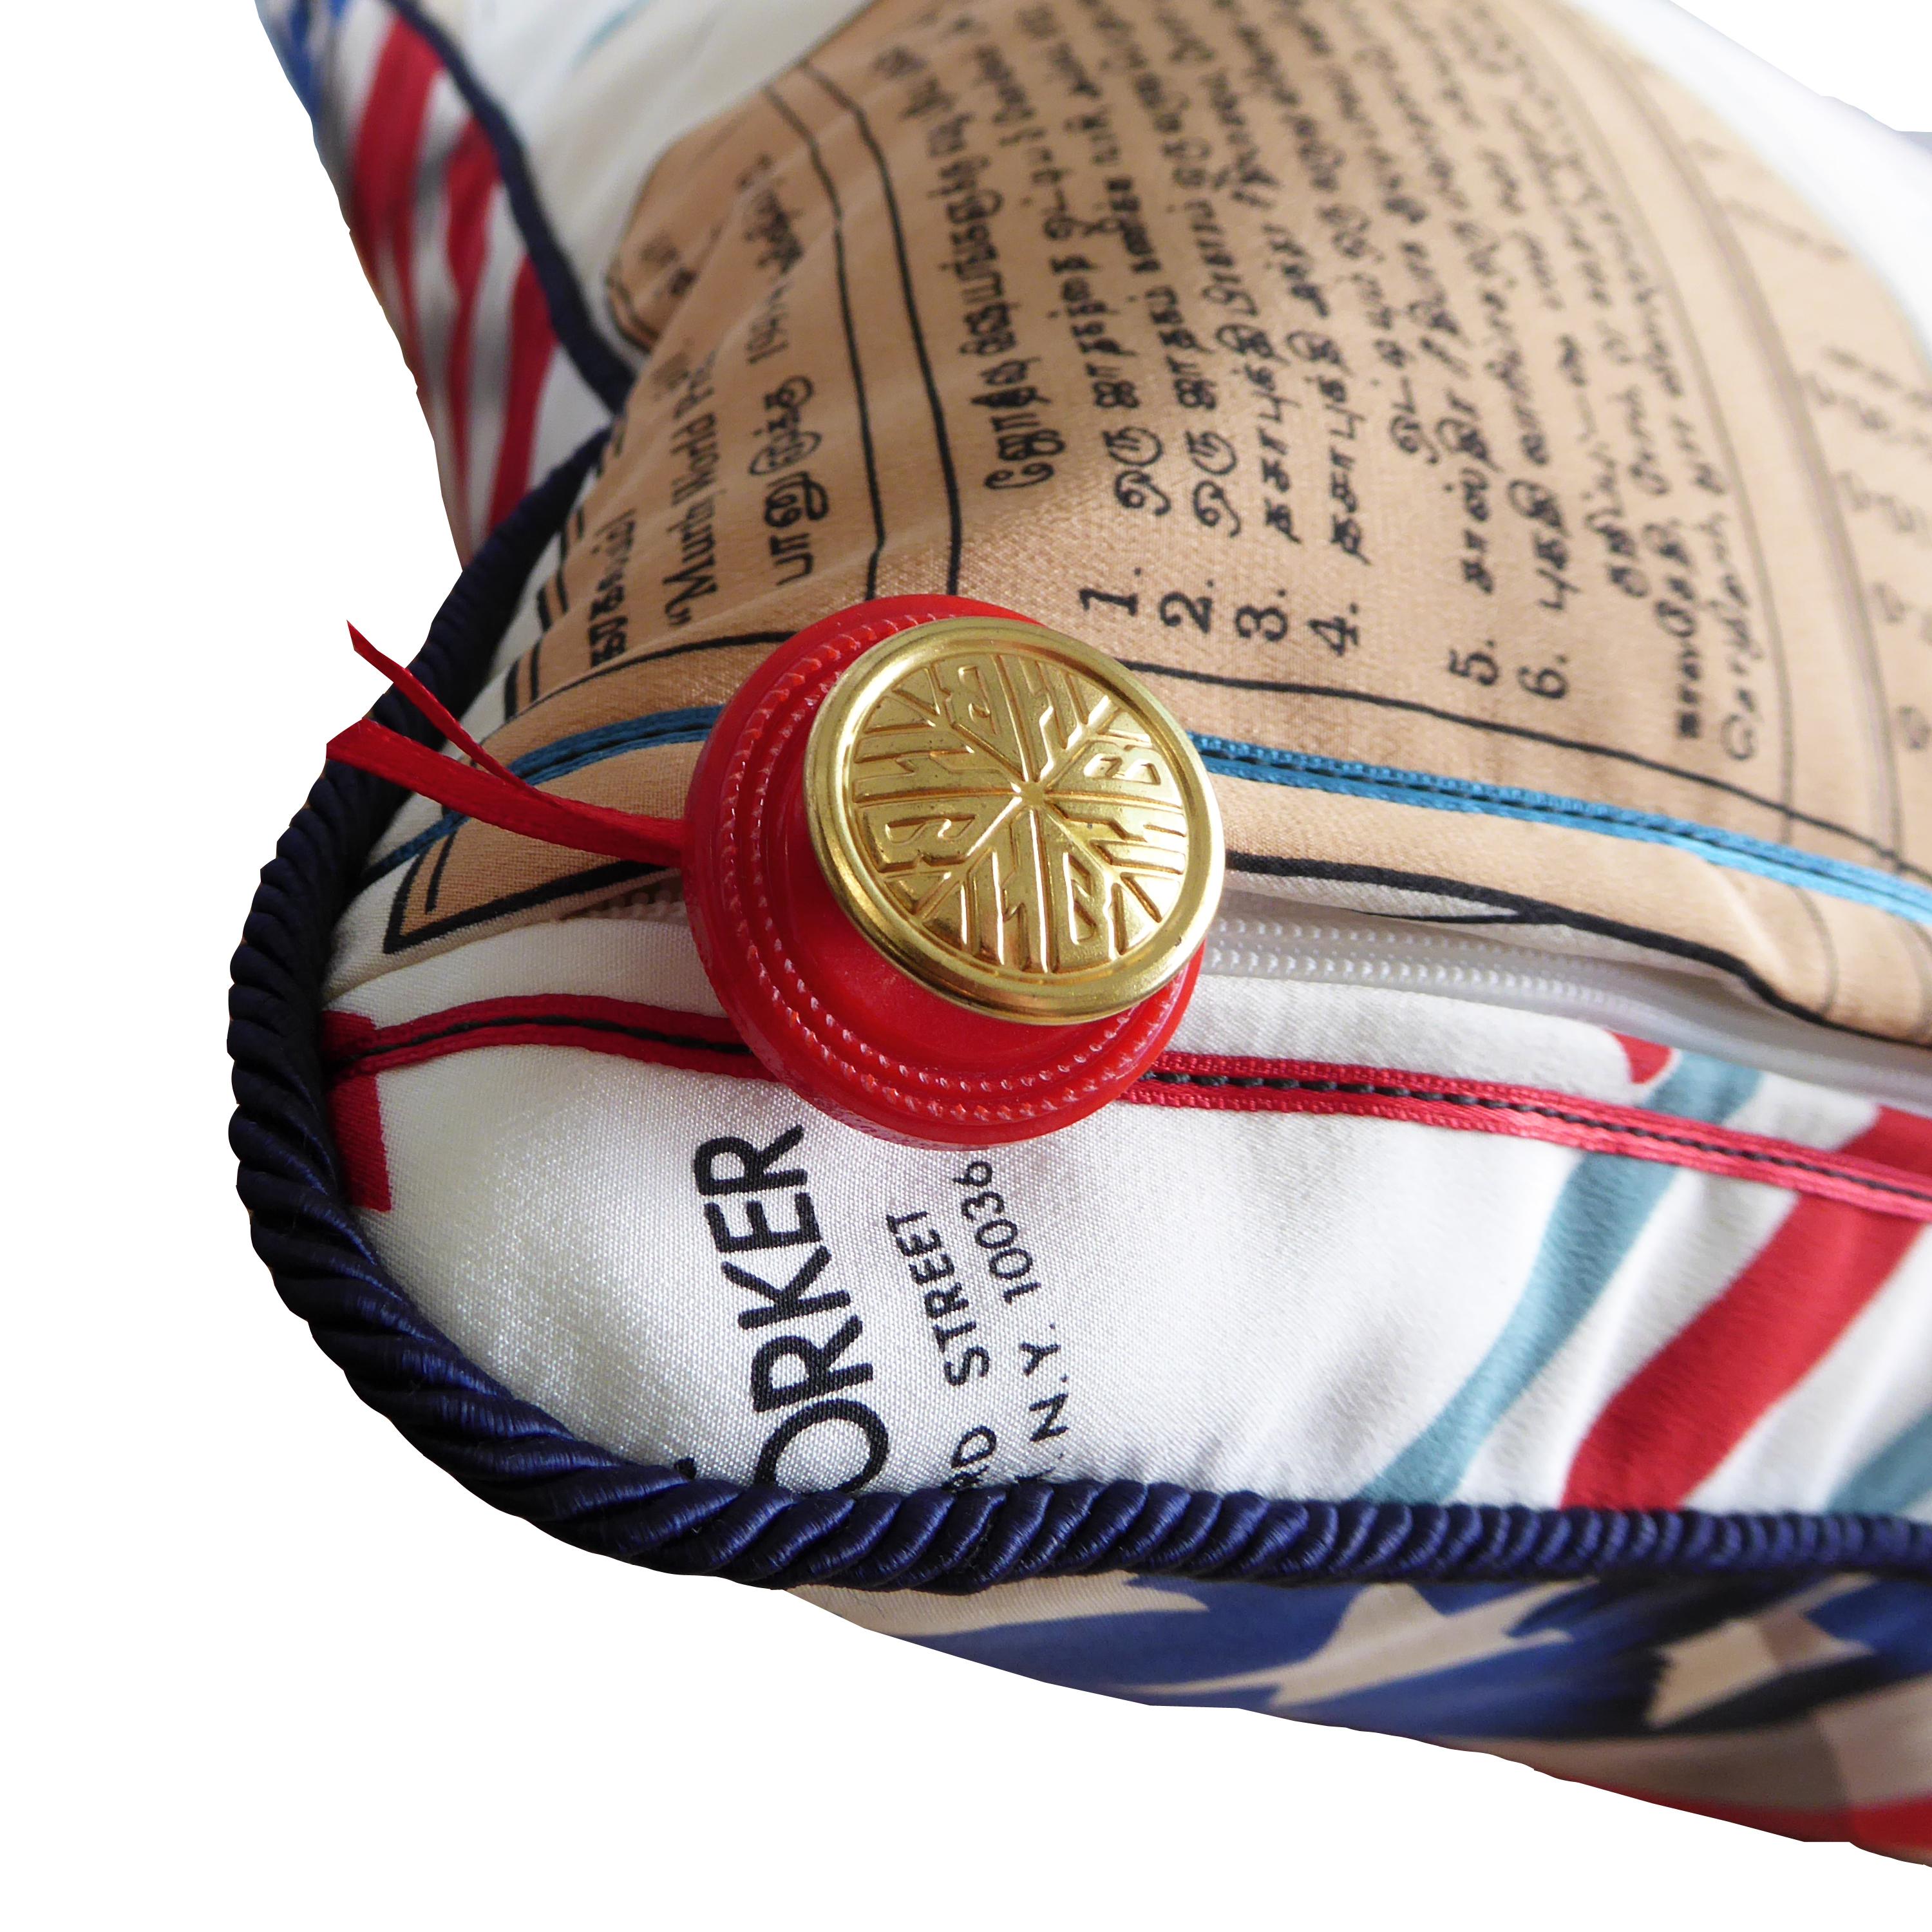 Organic Modern ‘Vintage Cushions’ Luxury Silk pillow 'The Star Spangled Banner' Made in London